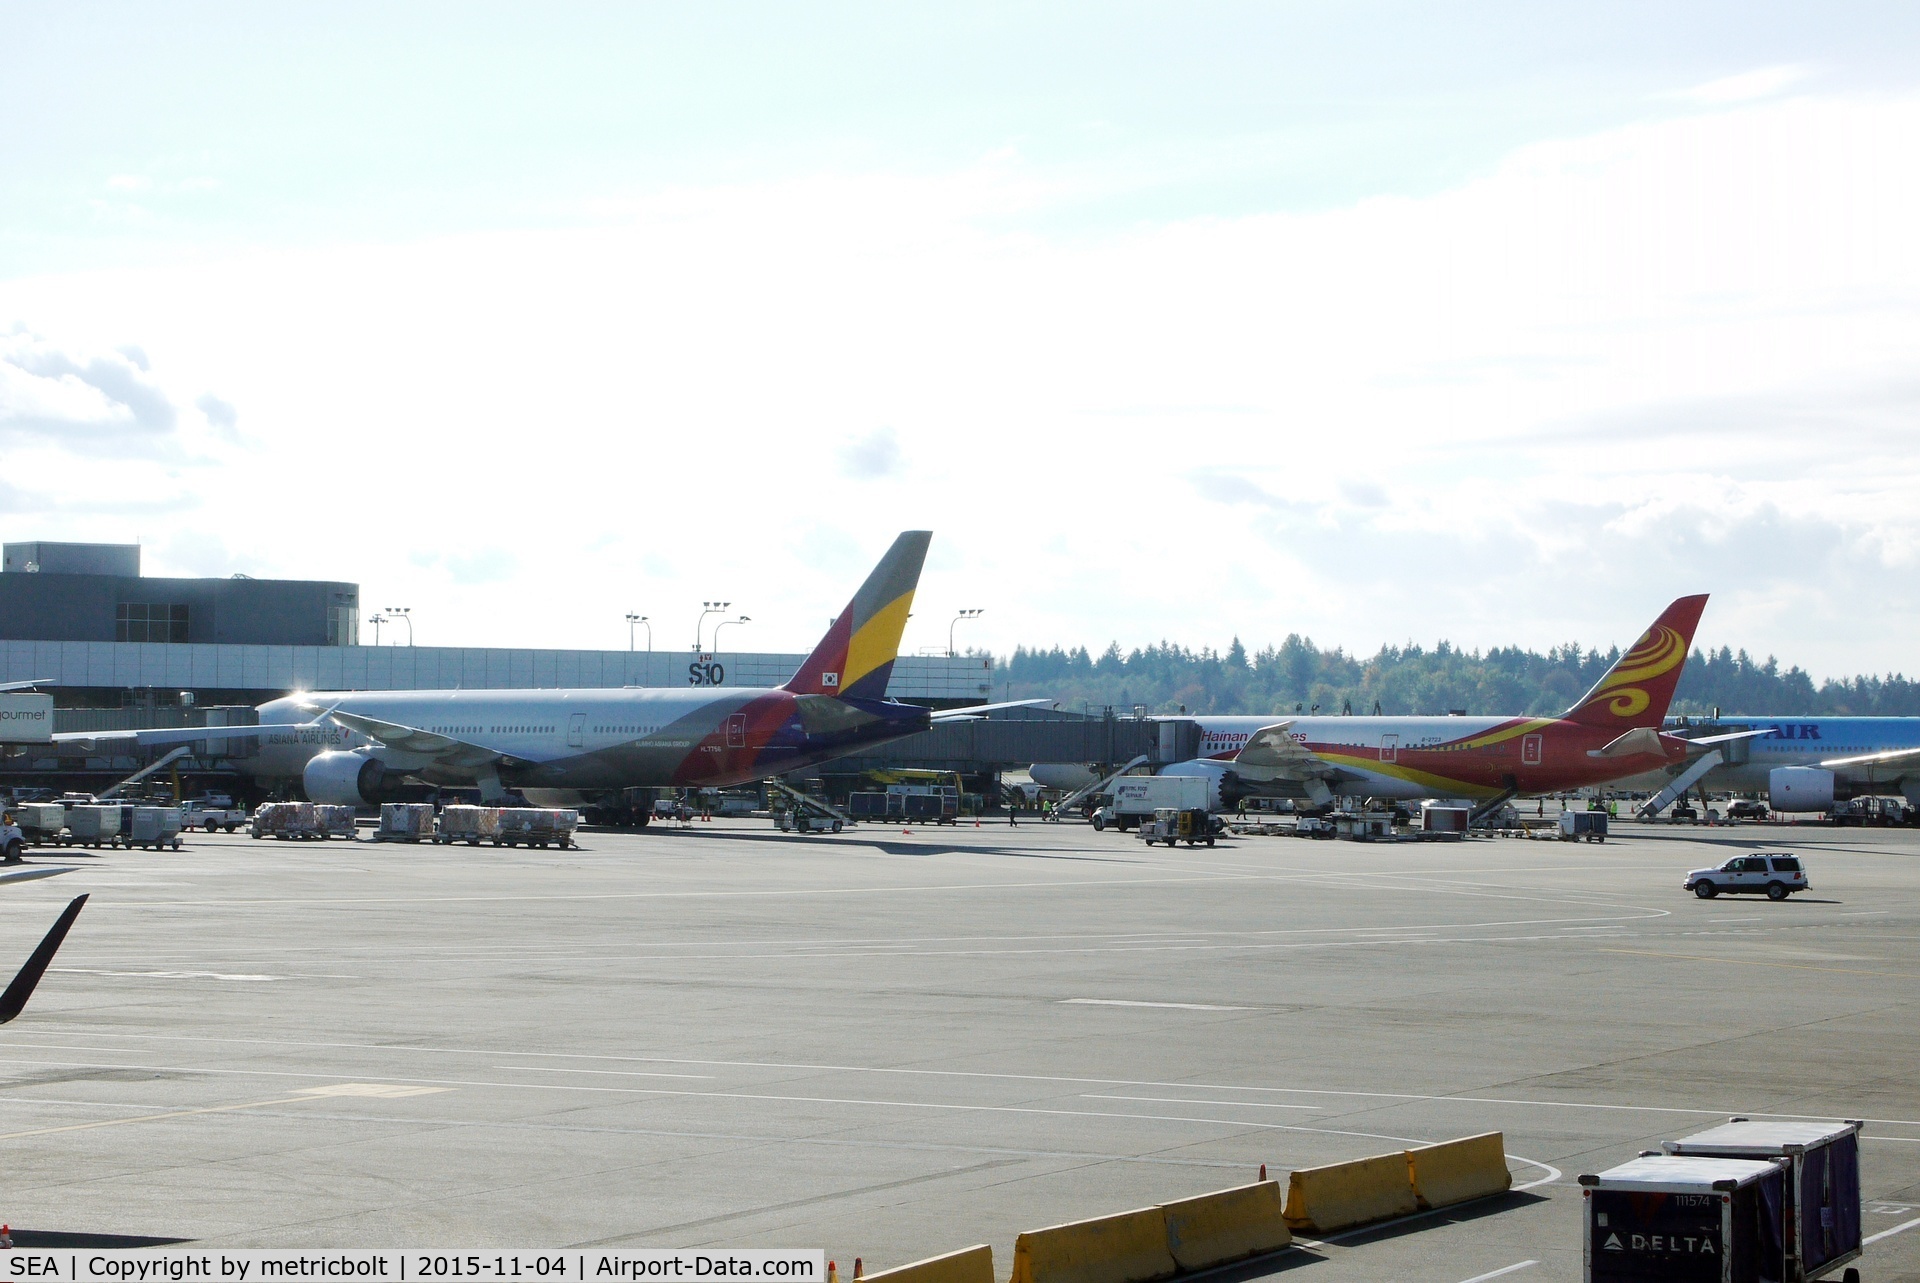 Seattle-tacoma International Airport (SEA) - Asian airlines at SeaTac